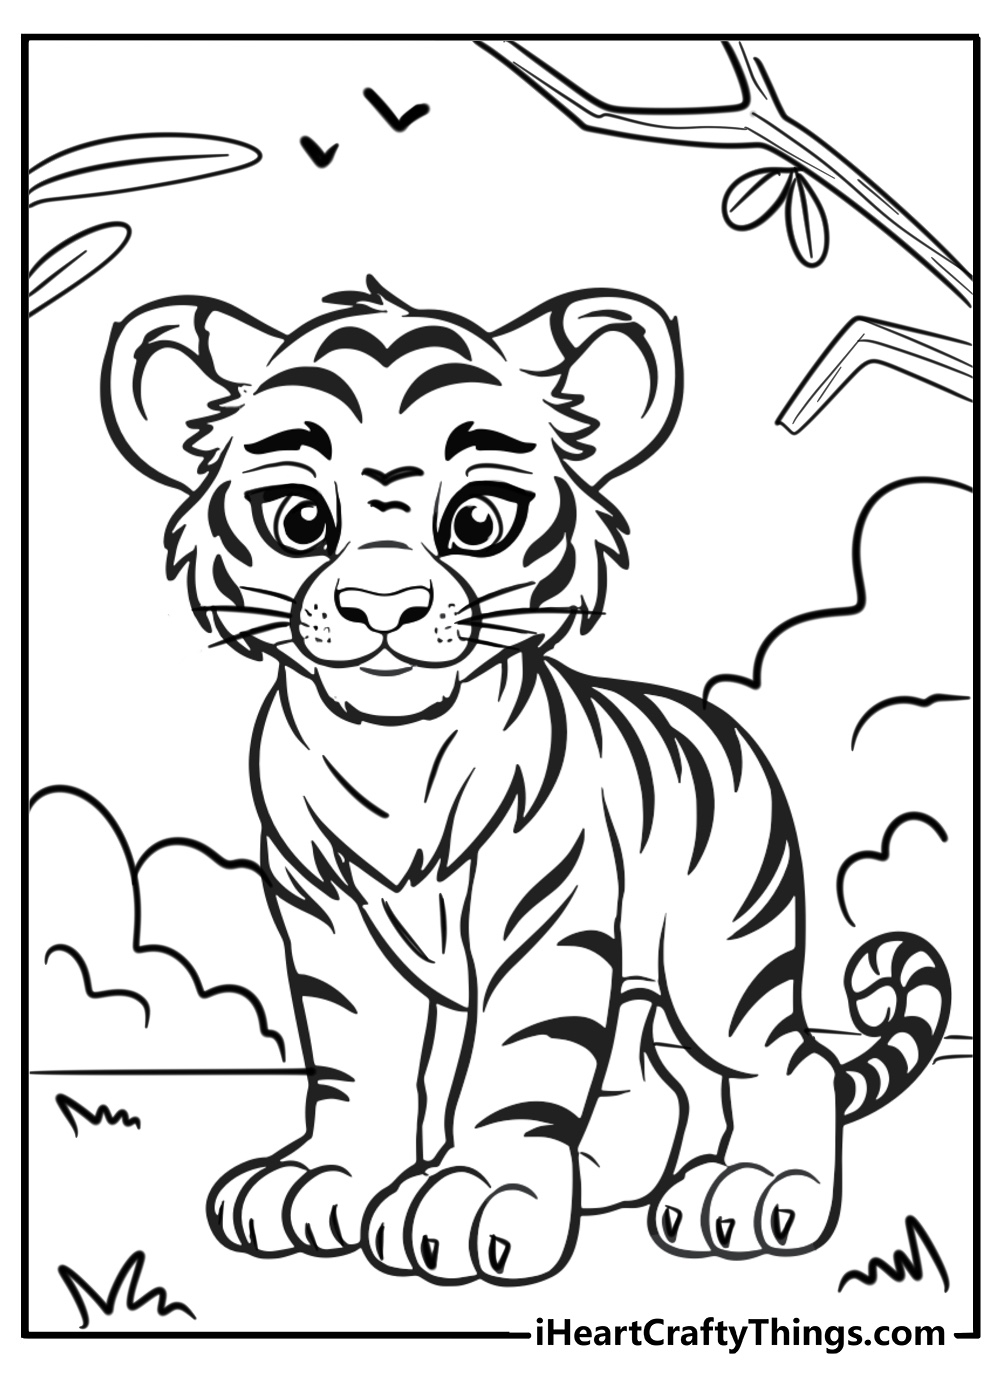 Tigers coloring pages